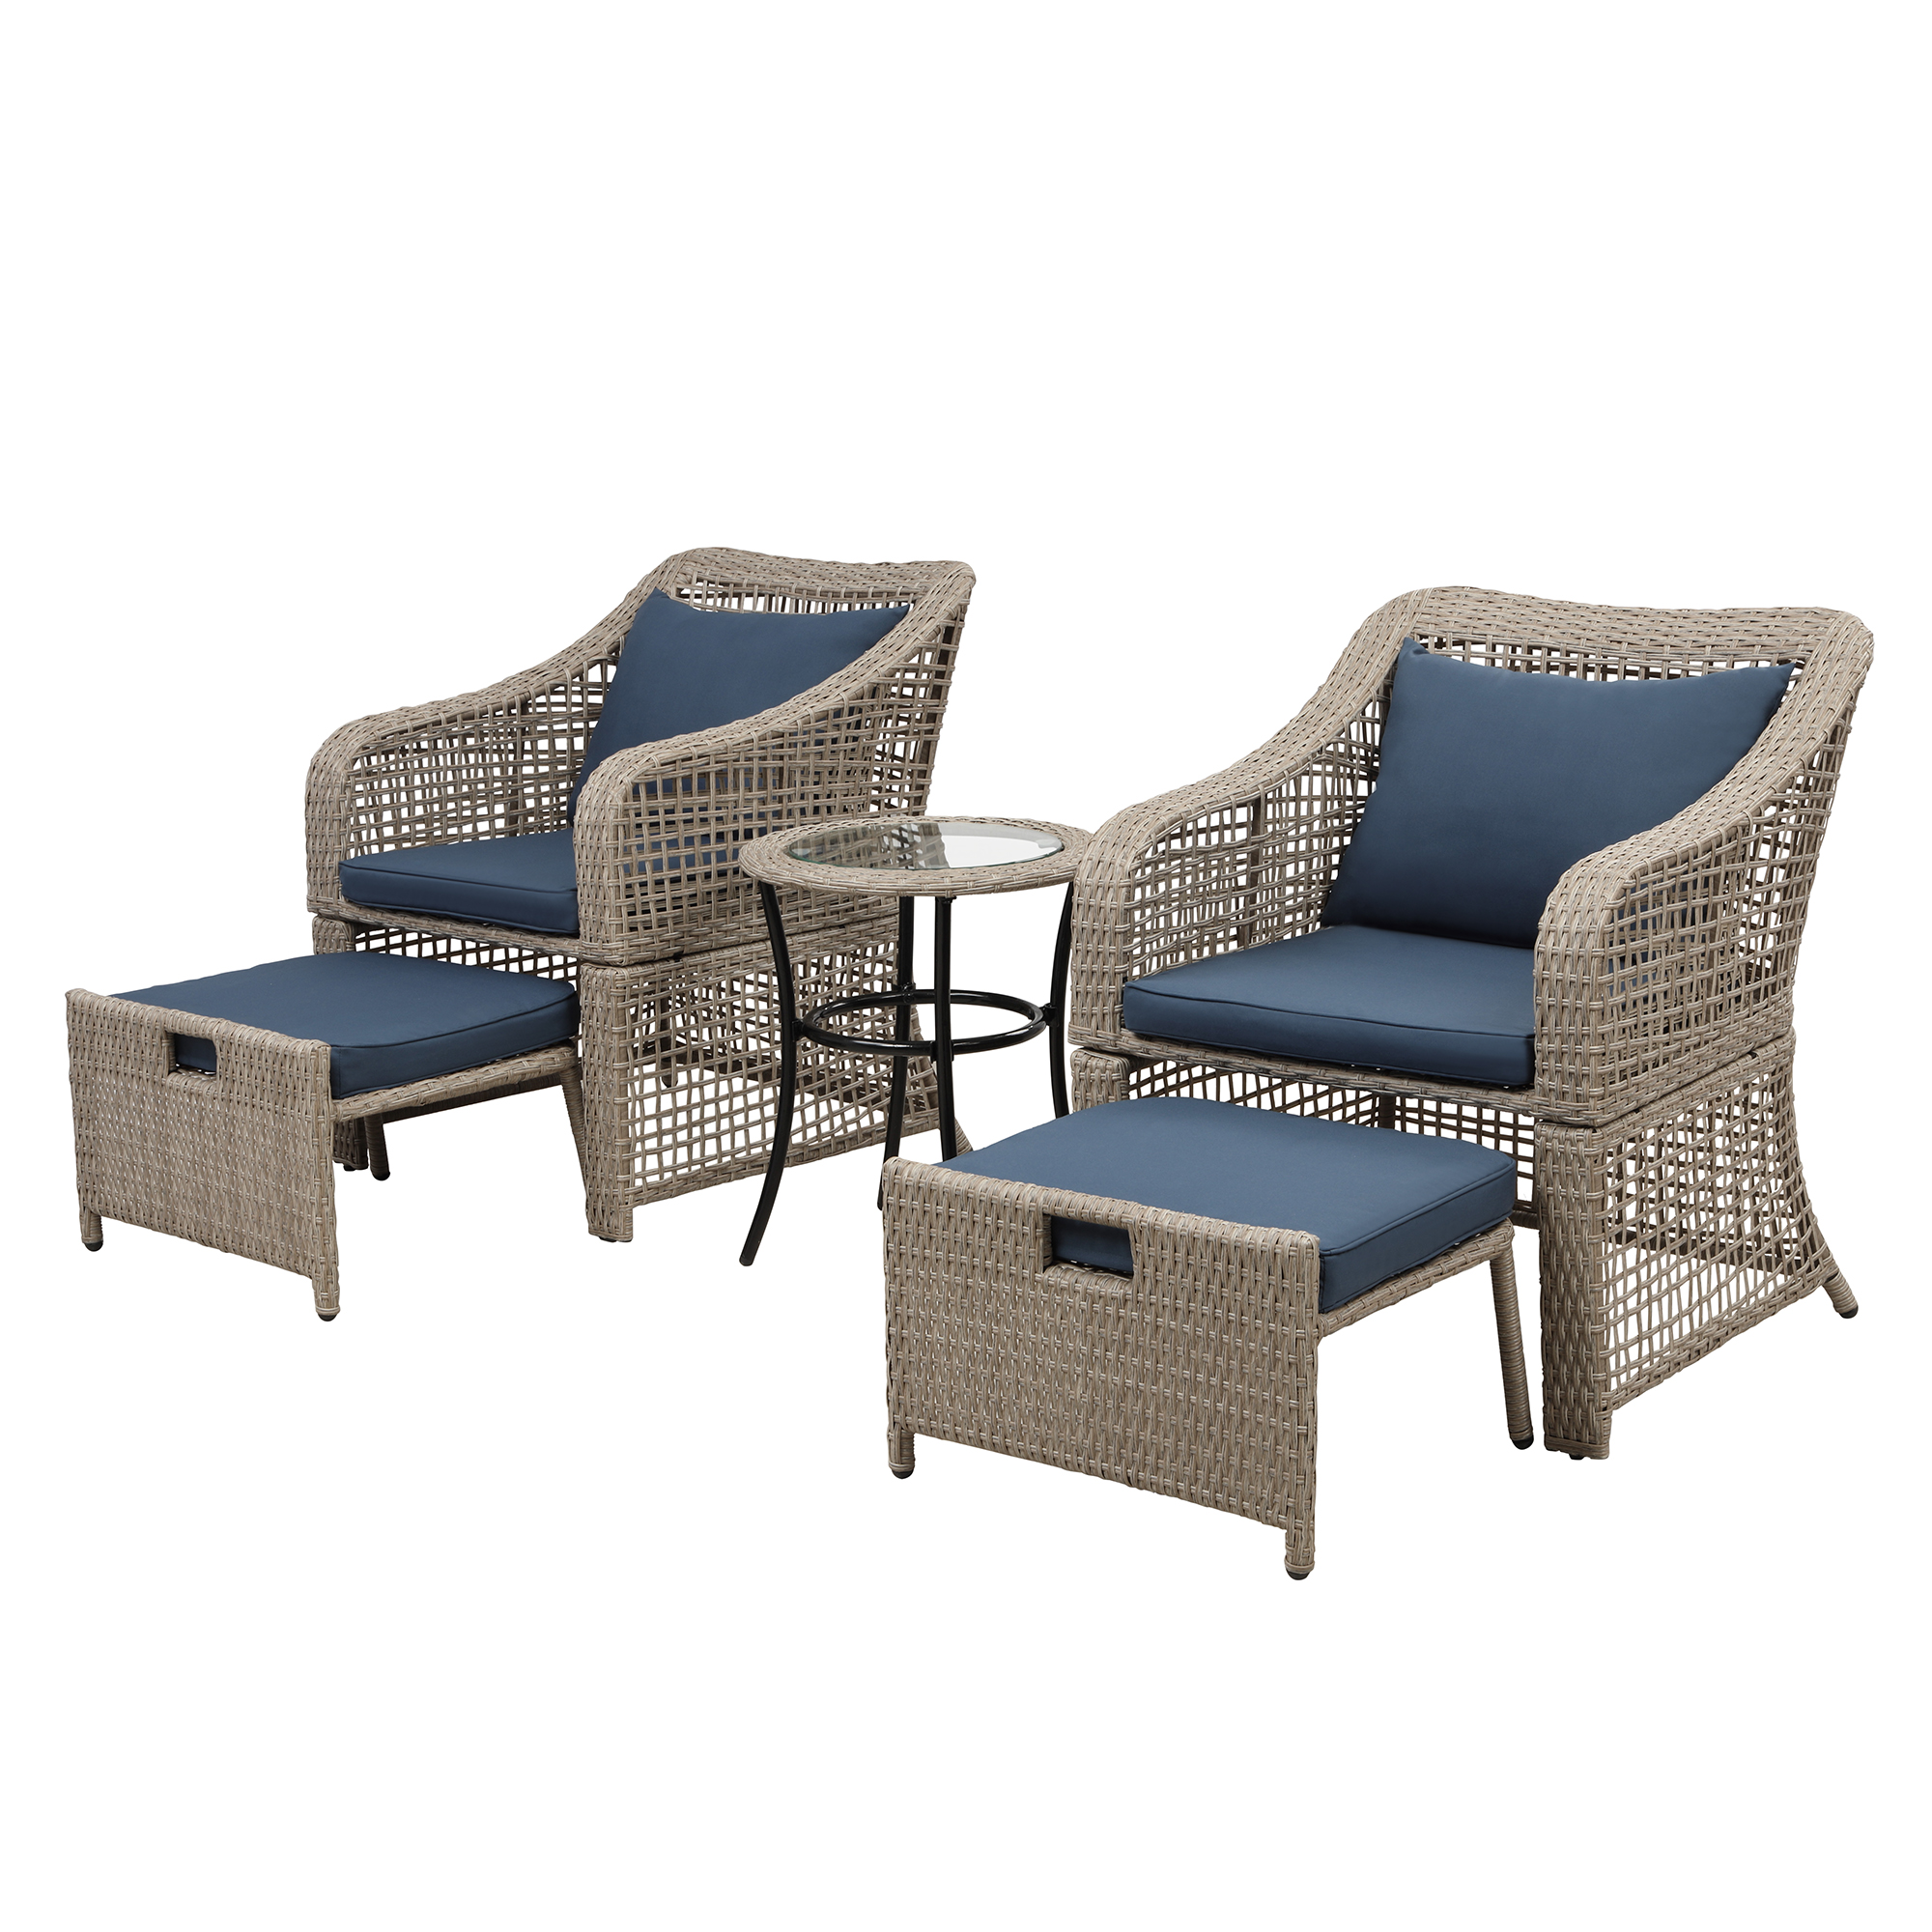 5 Piece Outdoor Patio Furniture Set, SEGMART Outdoor Lounge Chair Chat Conversation Set with 2 Cushioned Chairs, 2 Ottoman, Glass Table, PE Wicker Rattan Patio Bistro Set for Backyard, Porch, LLL329 - image 3 of 9